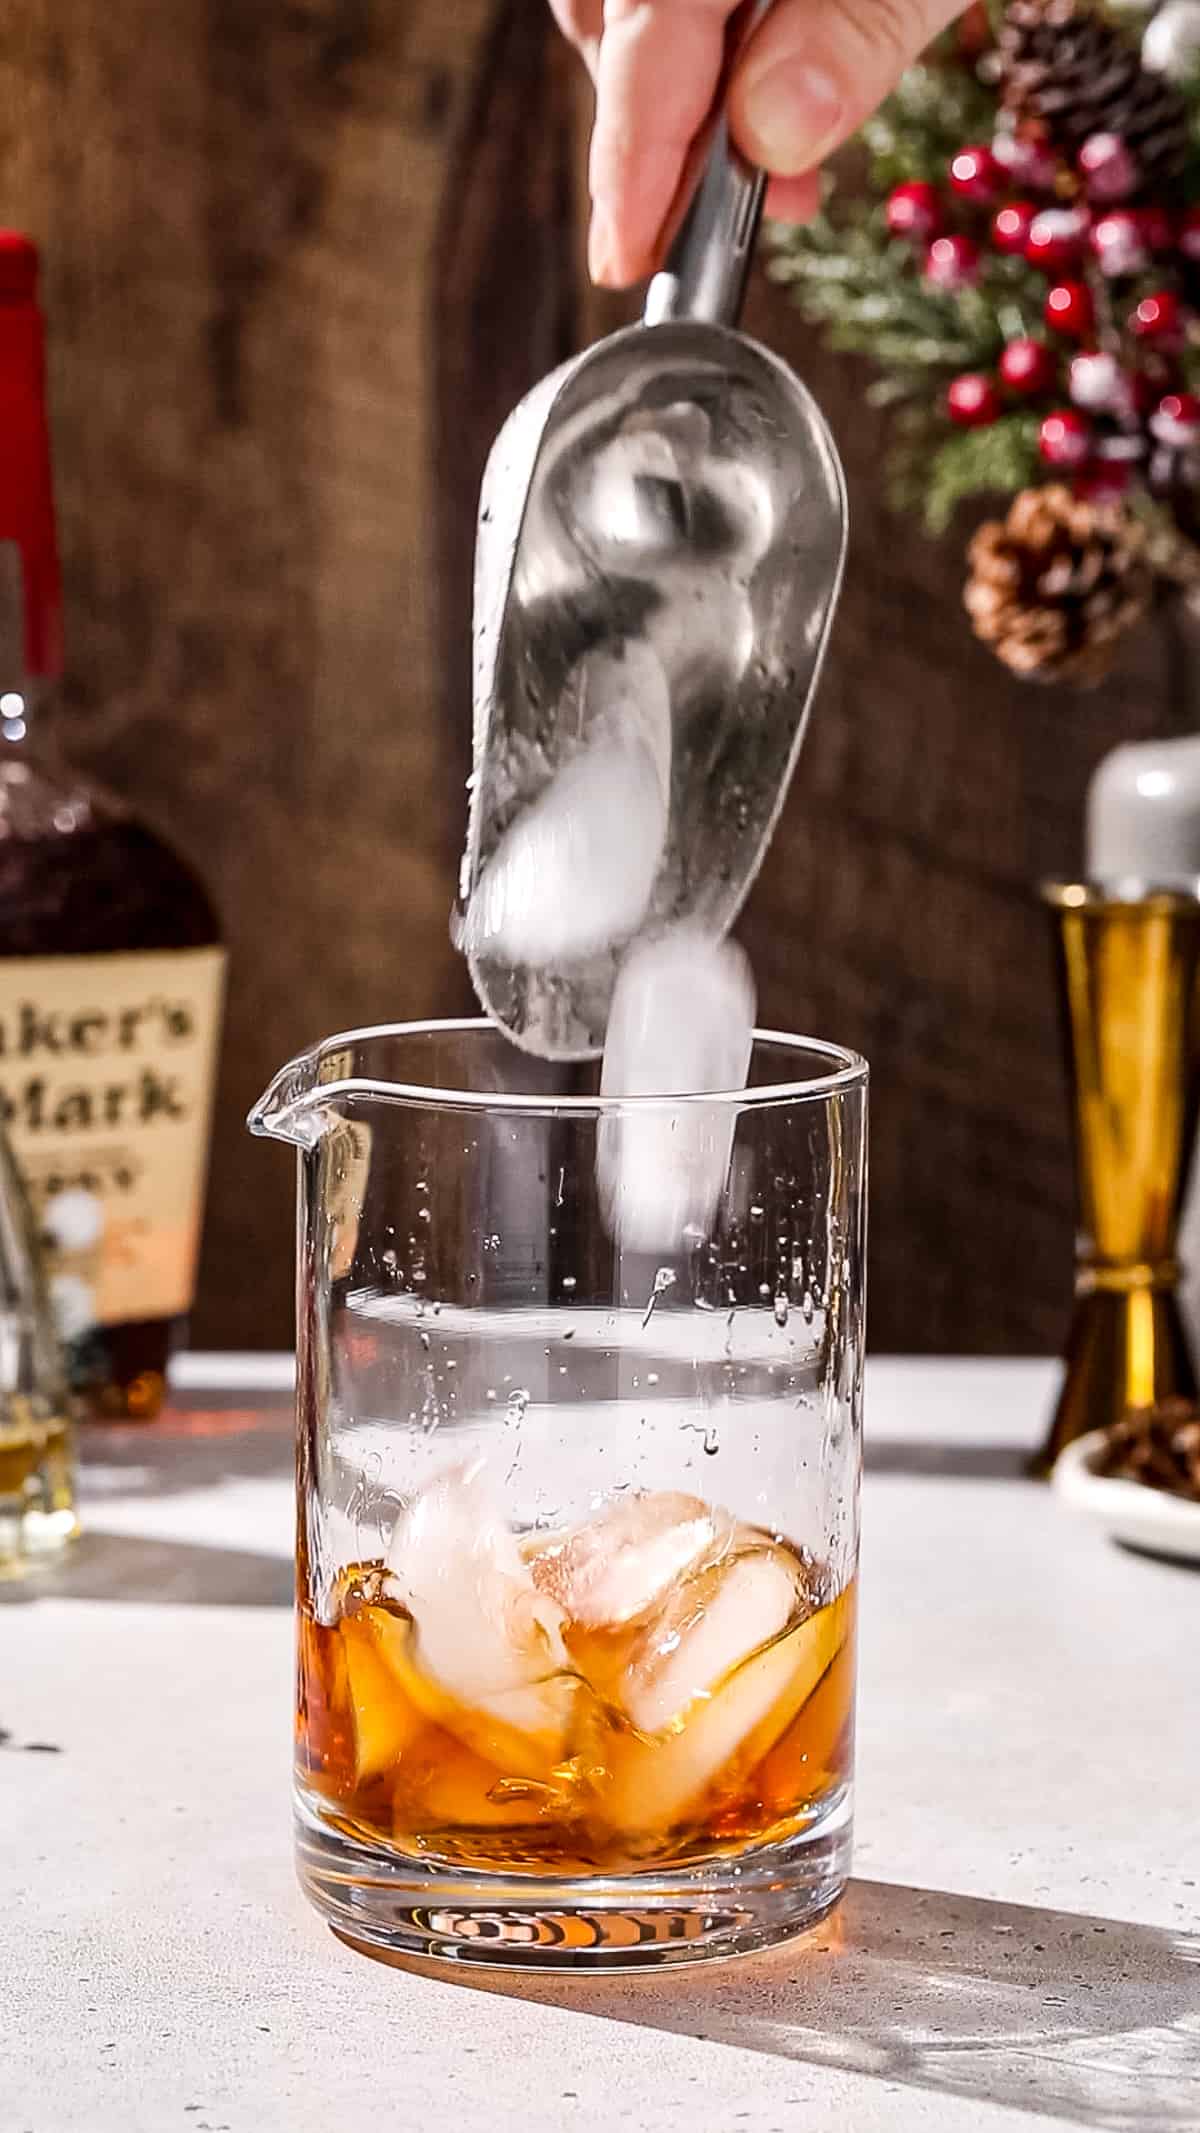 Hand using an ice scoop to add ice to a cocktail mixing glass.